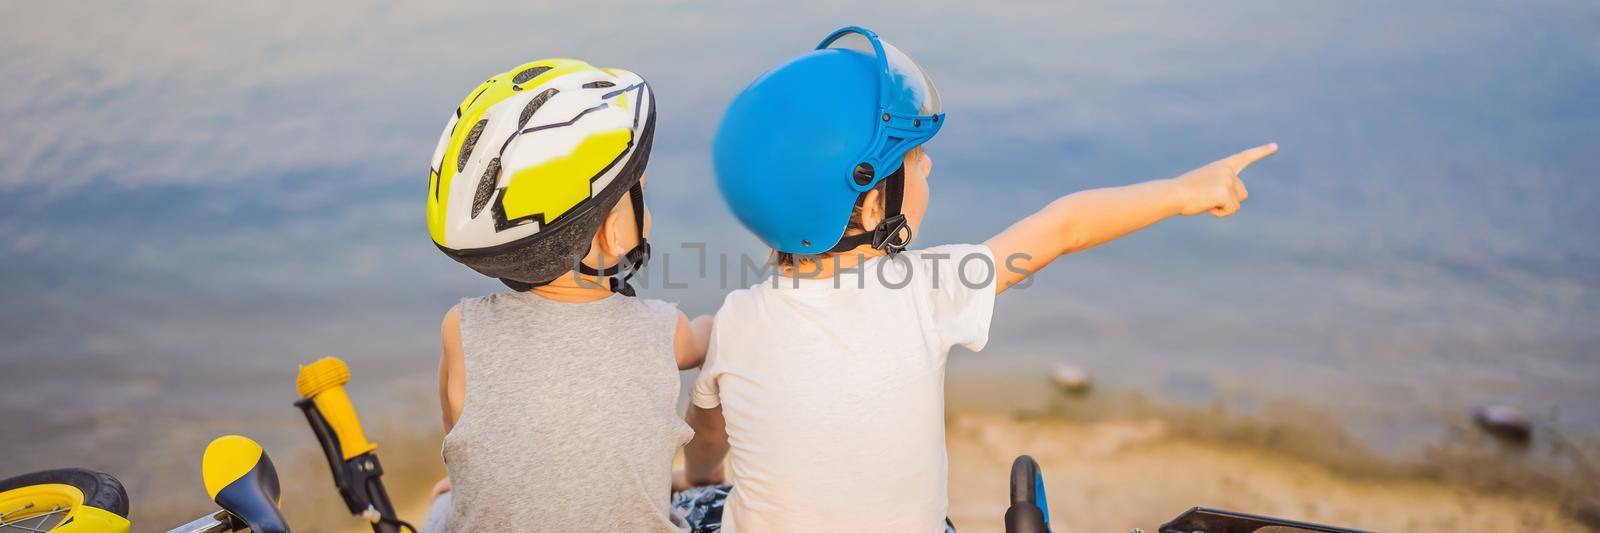 Two boys sit on the shore of the lake after riding a bike and scooter. BANNER, LONG FORMAT